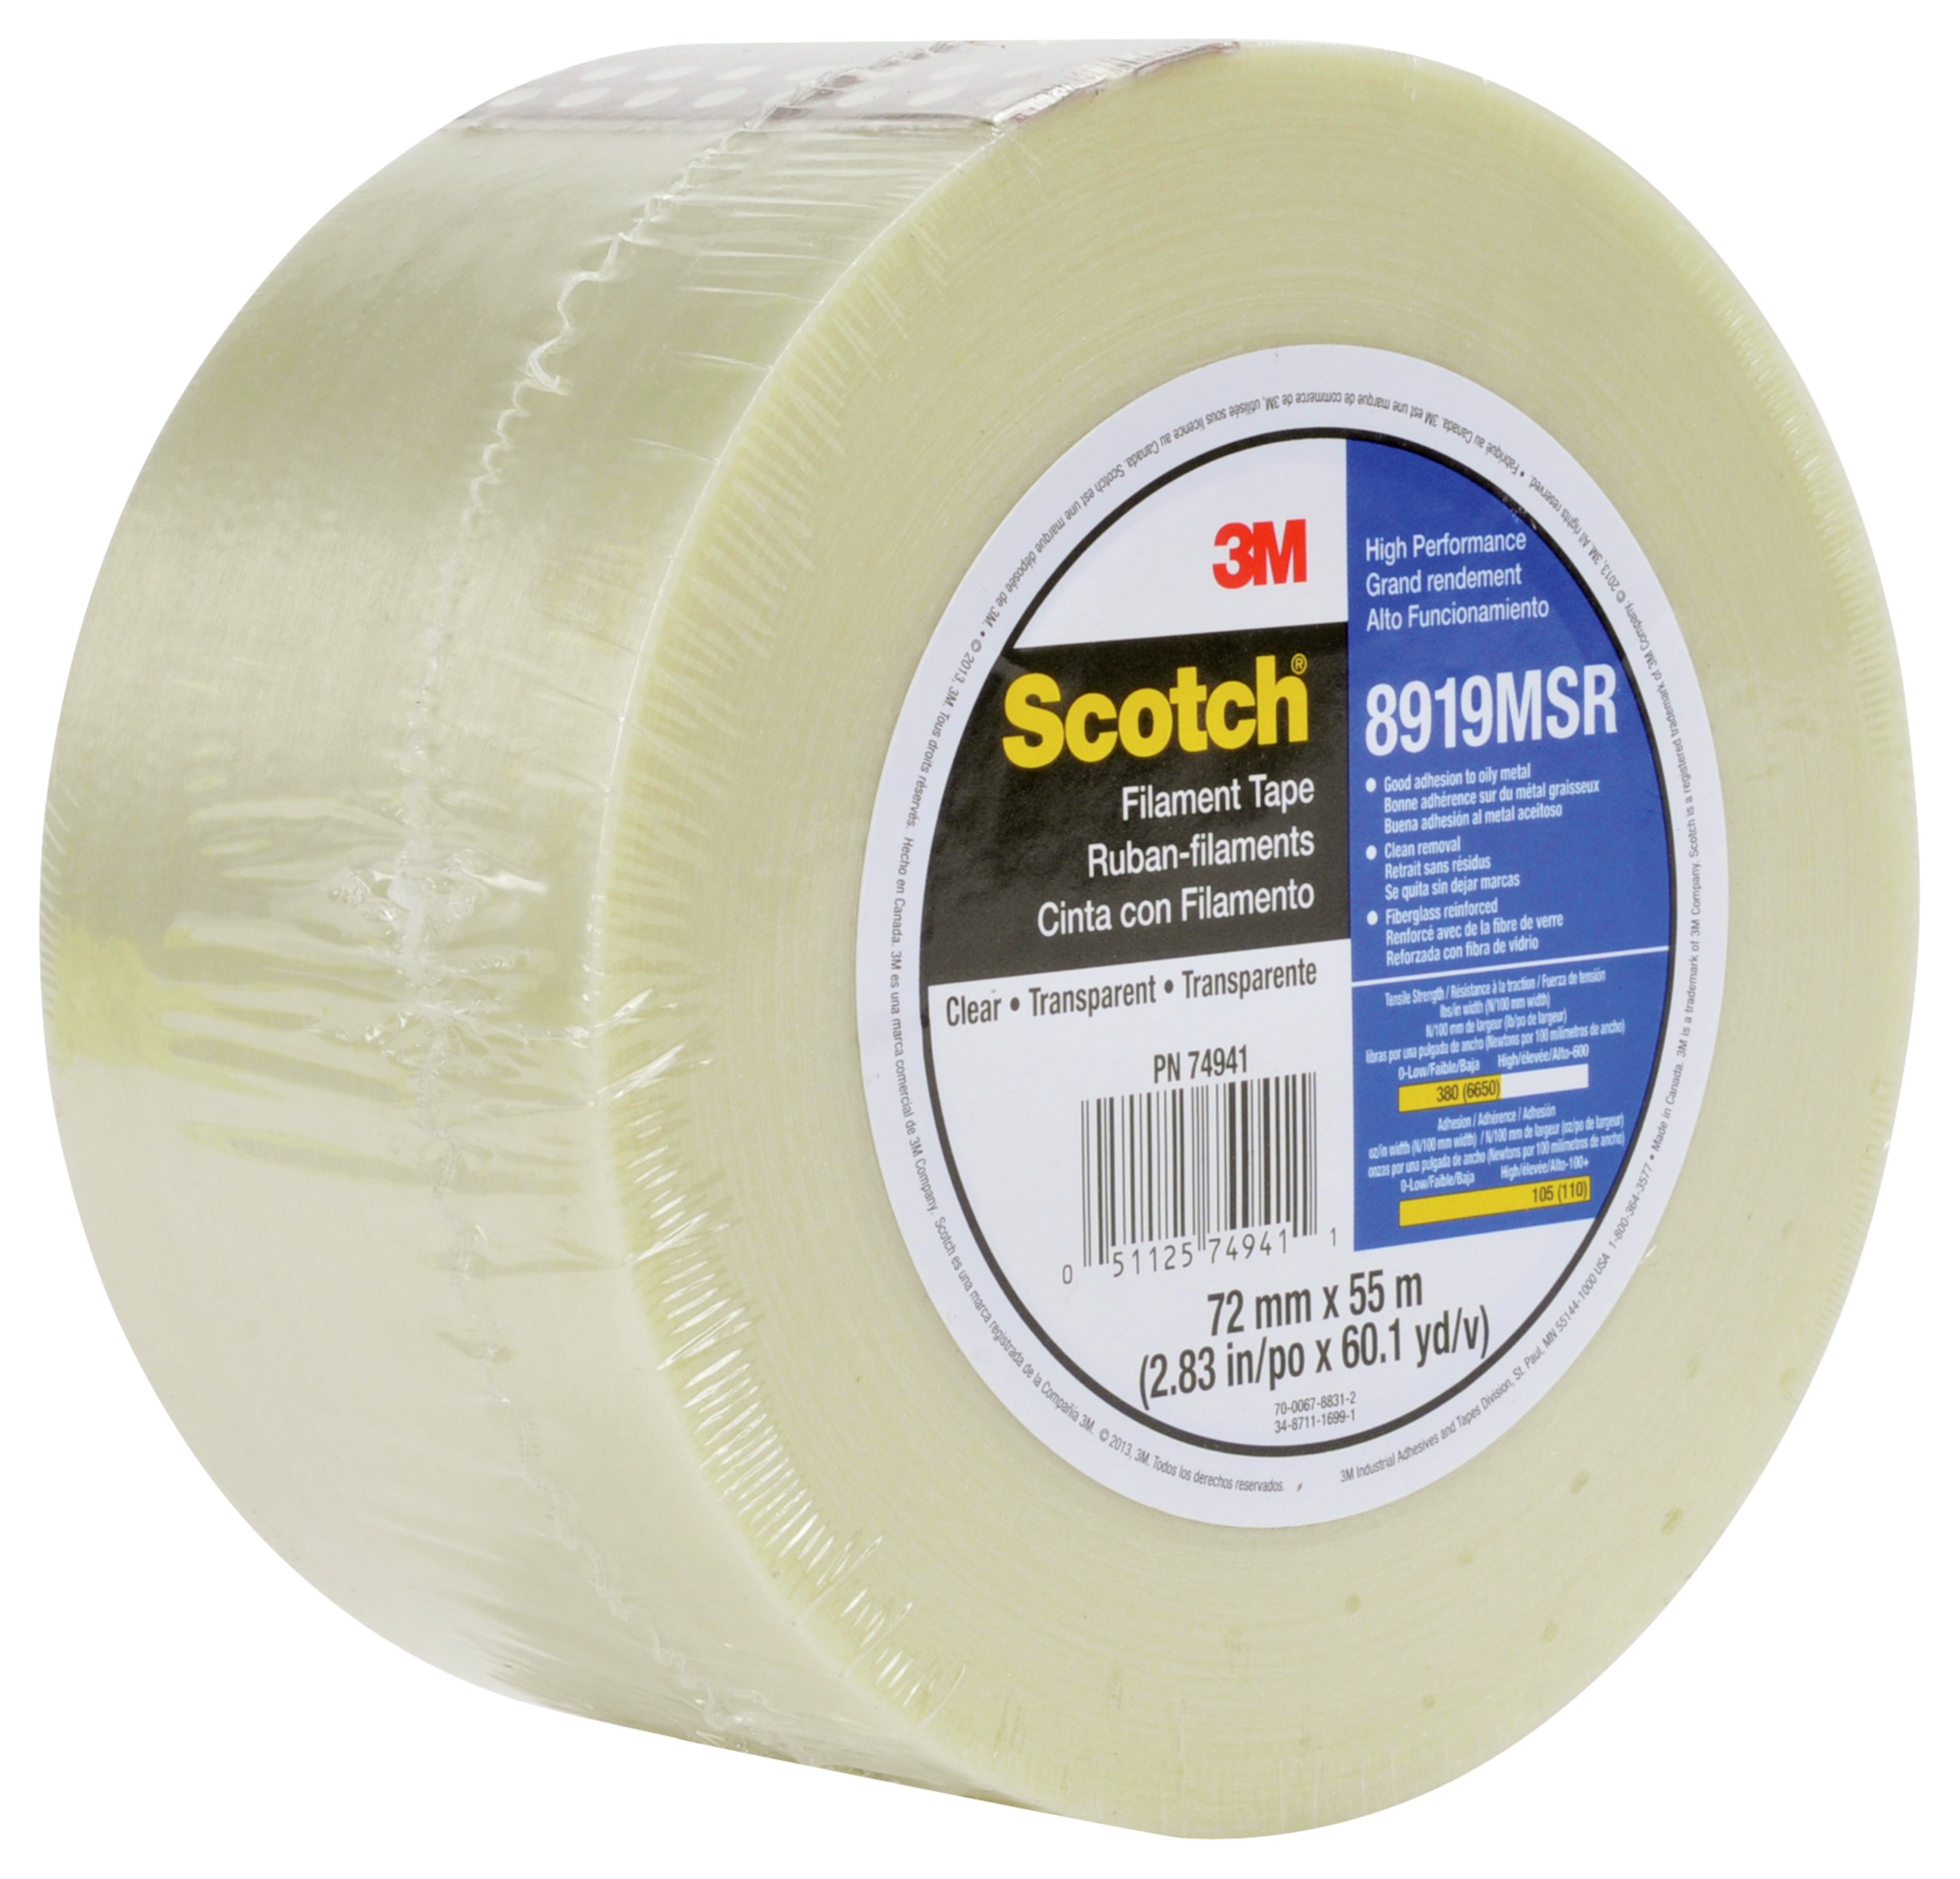 Scotch® Filament Tape 8919MSR is an industrial-strength tape used in a variety of metalworking applications.